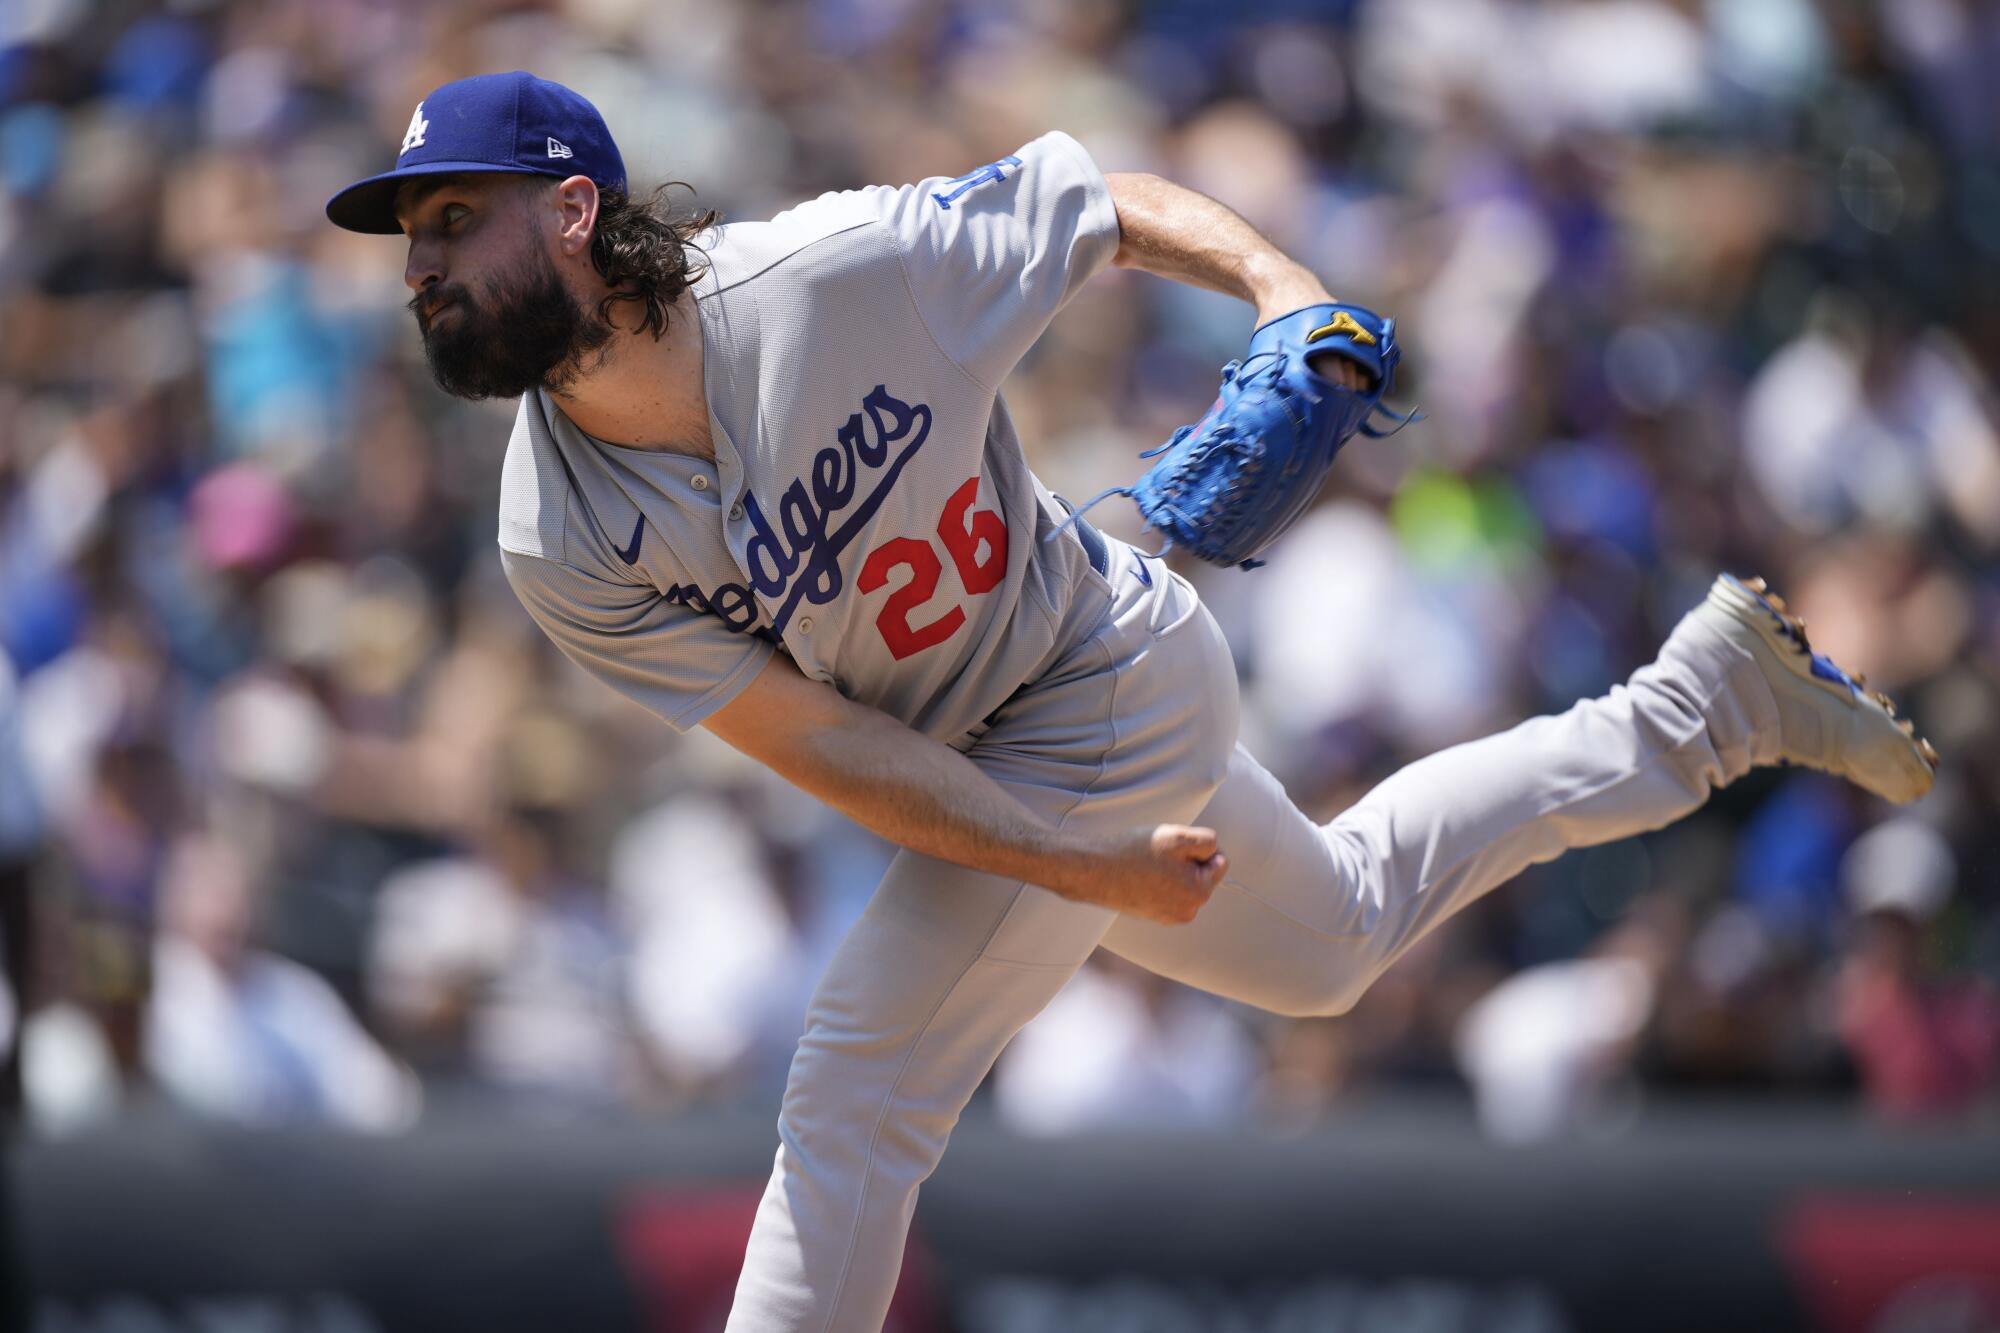 Dodgers starting pitcher Tony Gonsolin works against the Colorado Rockies.